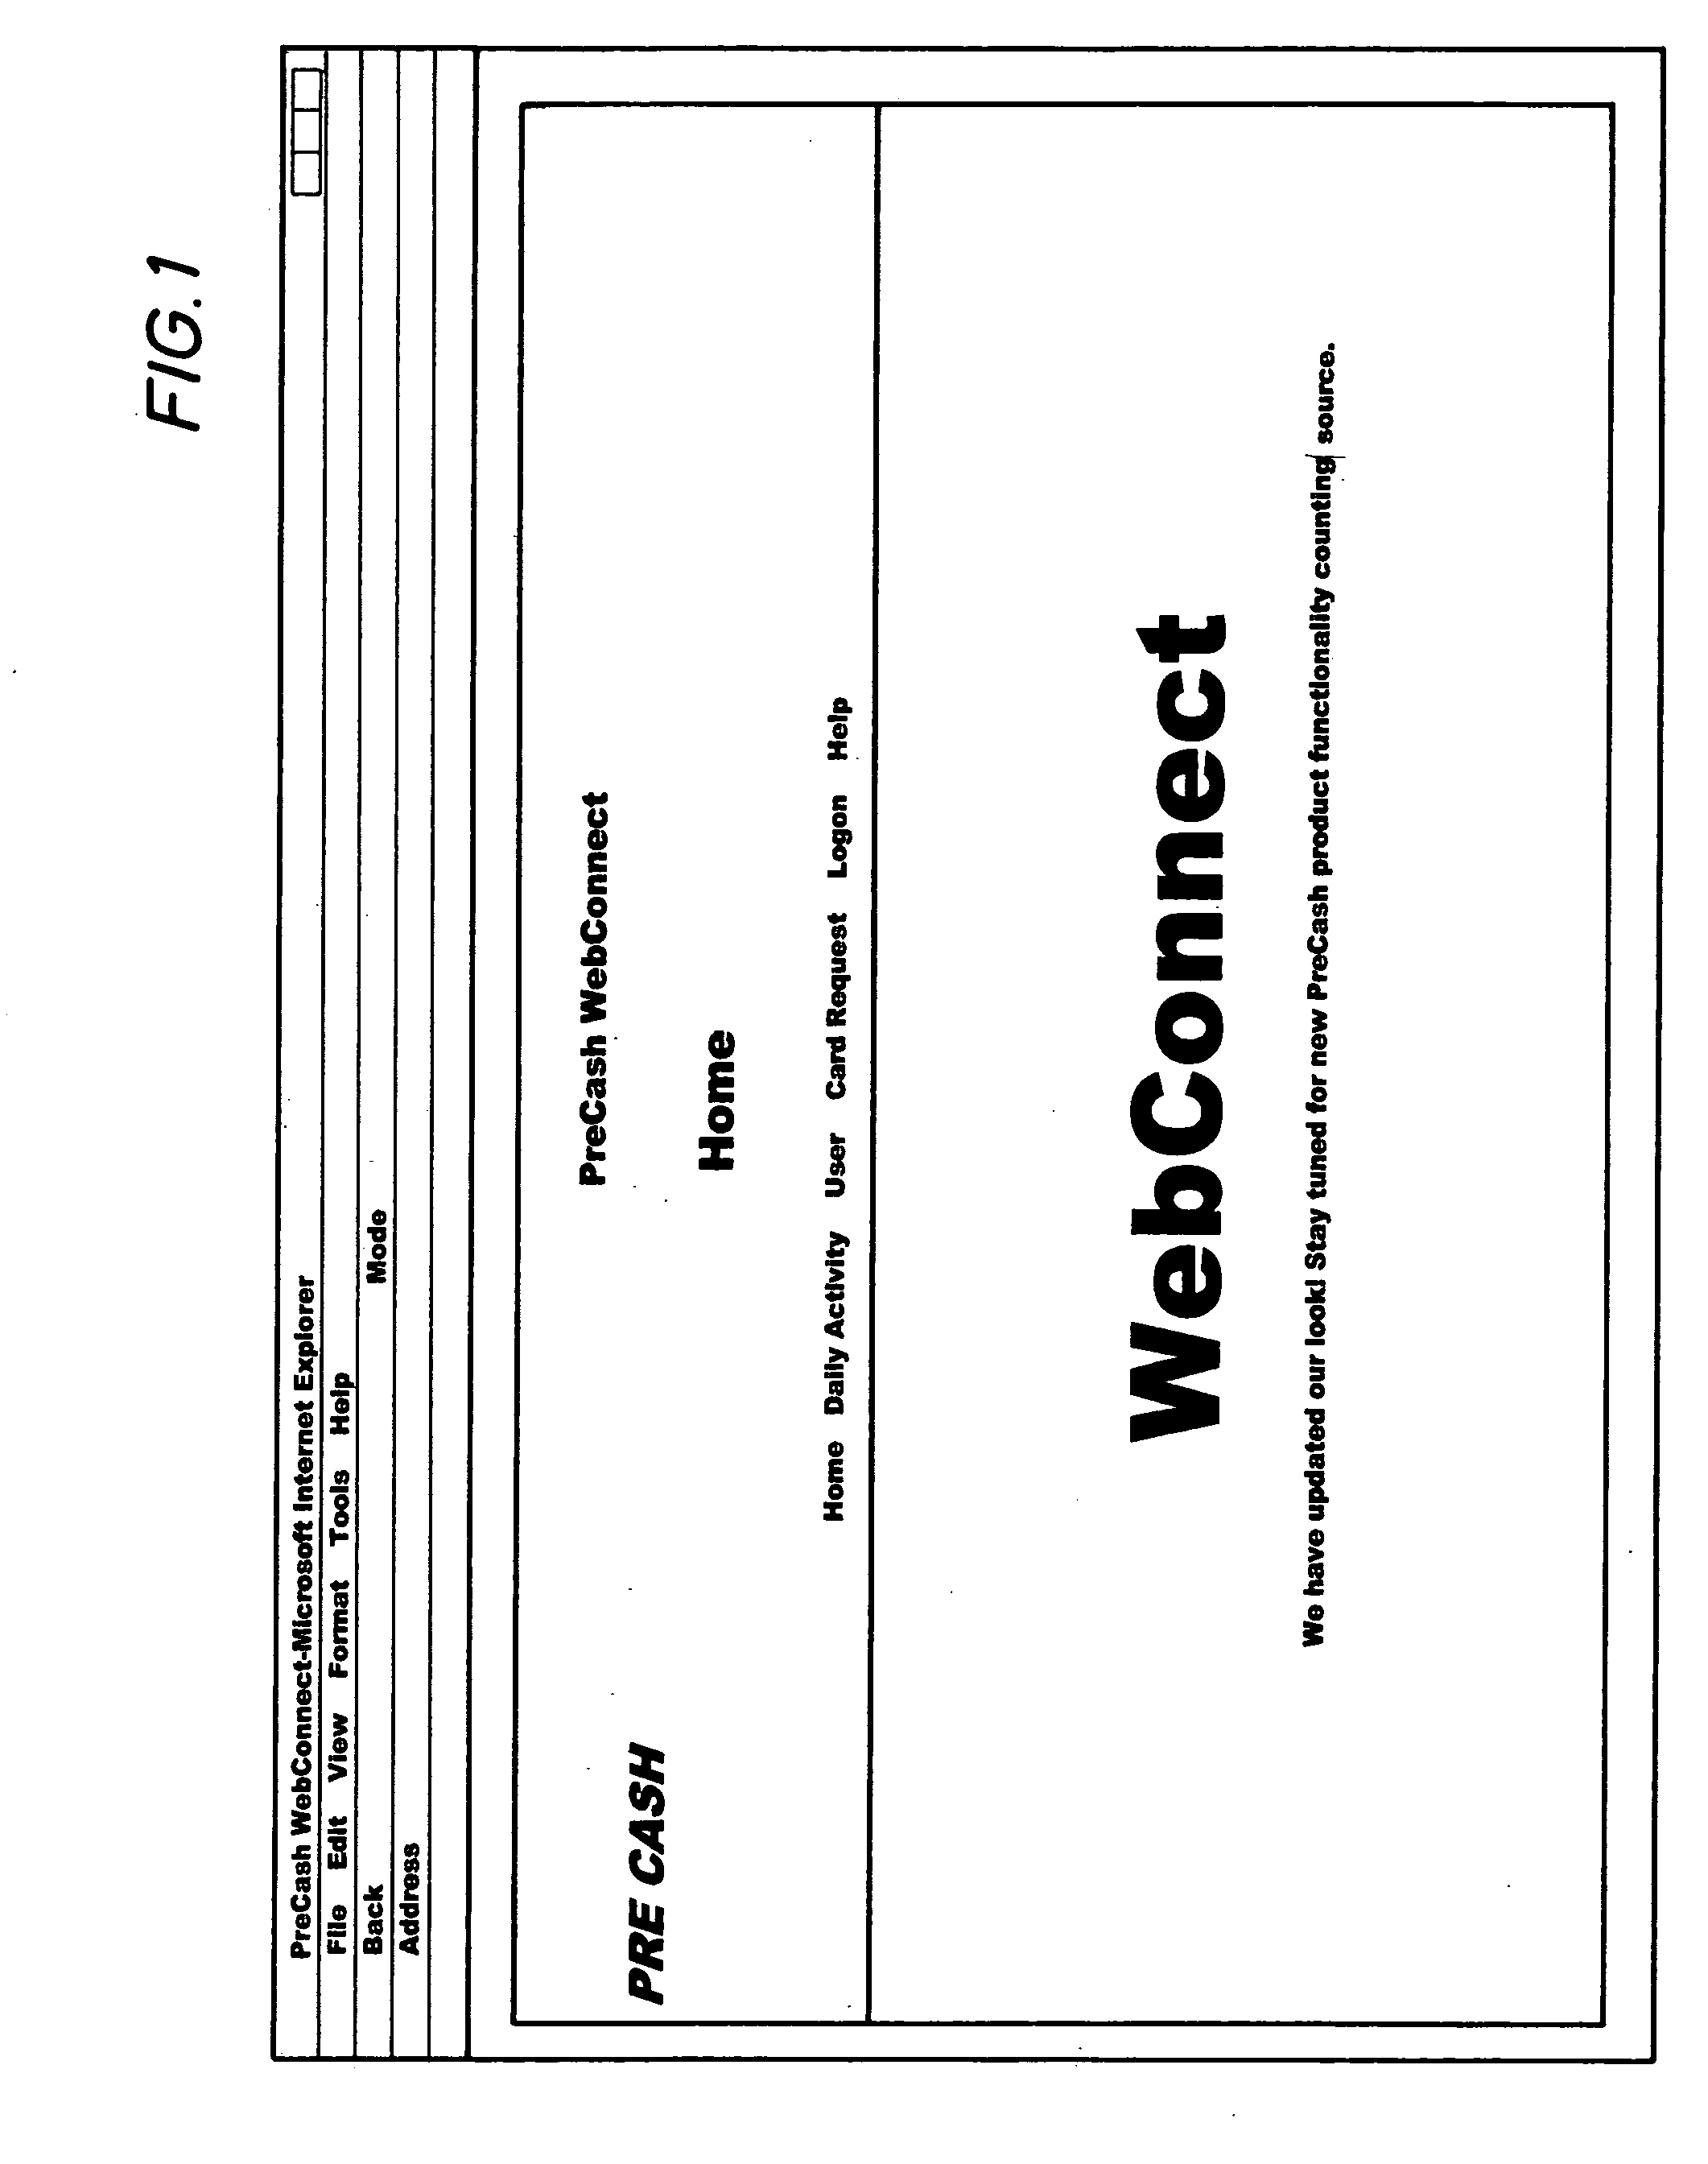 System and method for facilitating large scale payment transactions